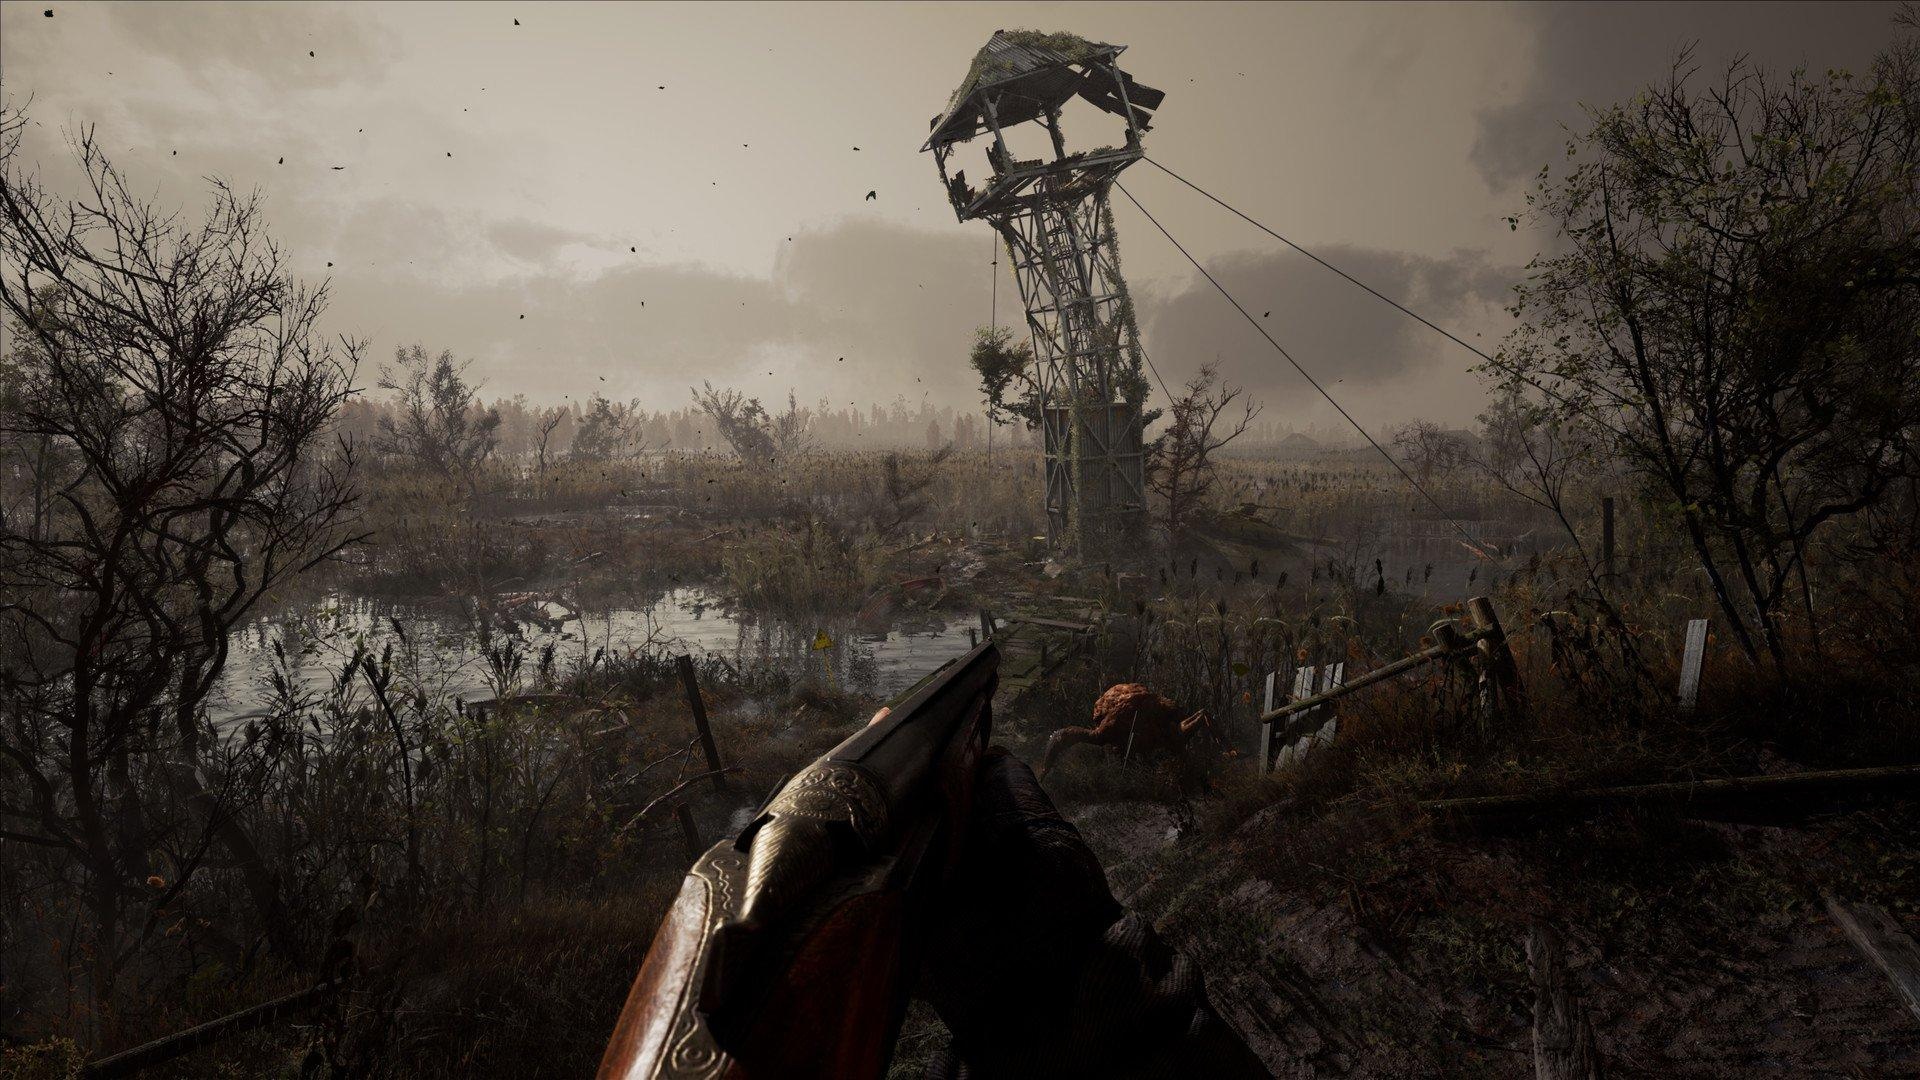 S.T.A.L.K.E.R. 2: The Great Swamps area, TOZ-34 gameplay demonstration, Flesh. 1920x1080 Full HD Wallpaper.